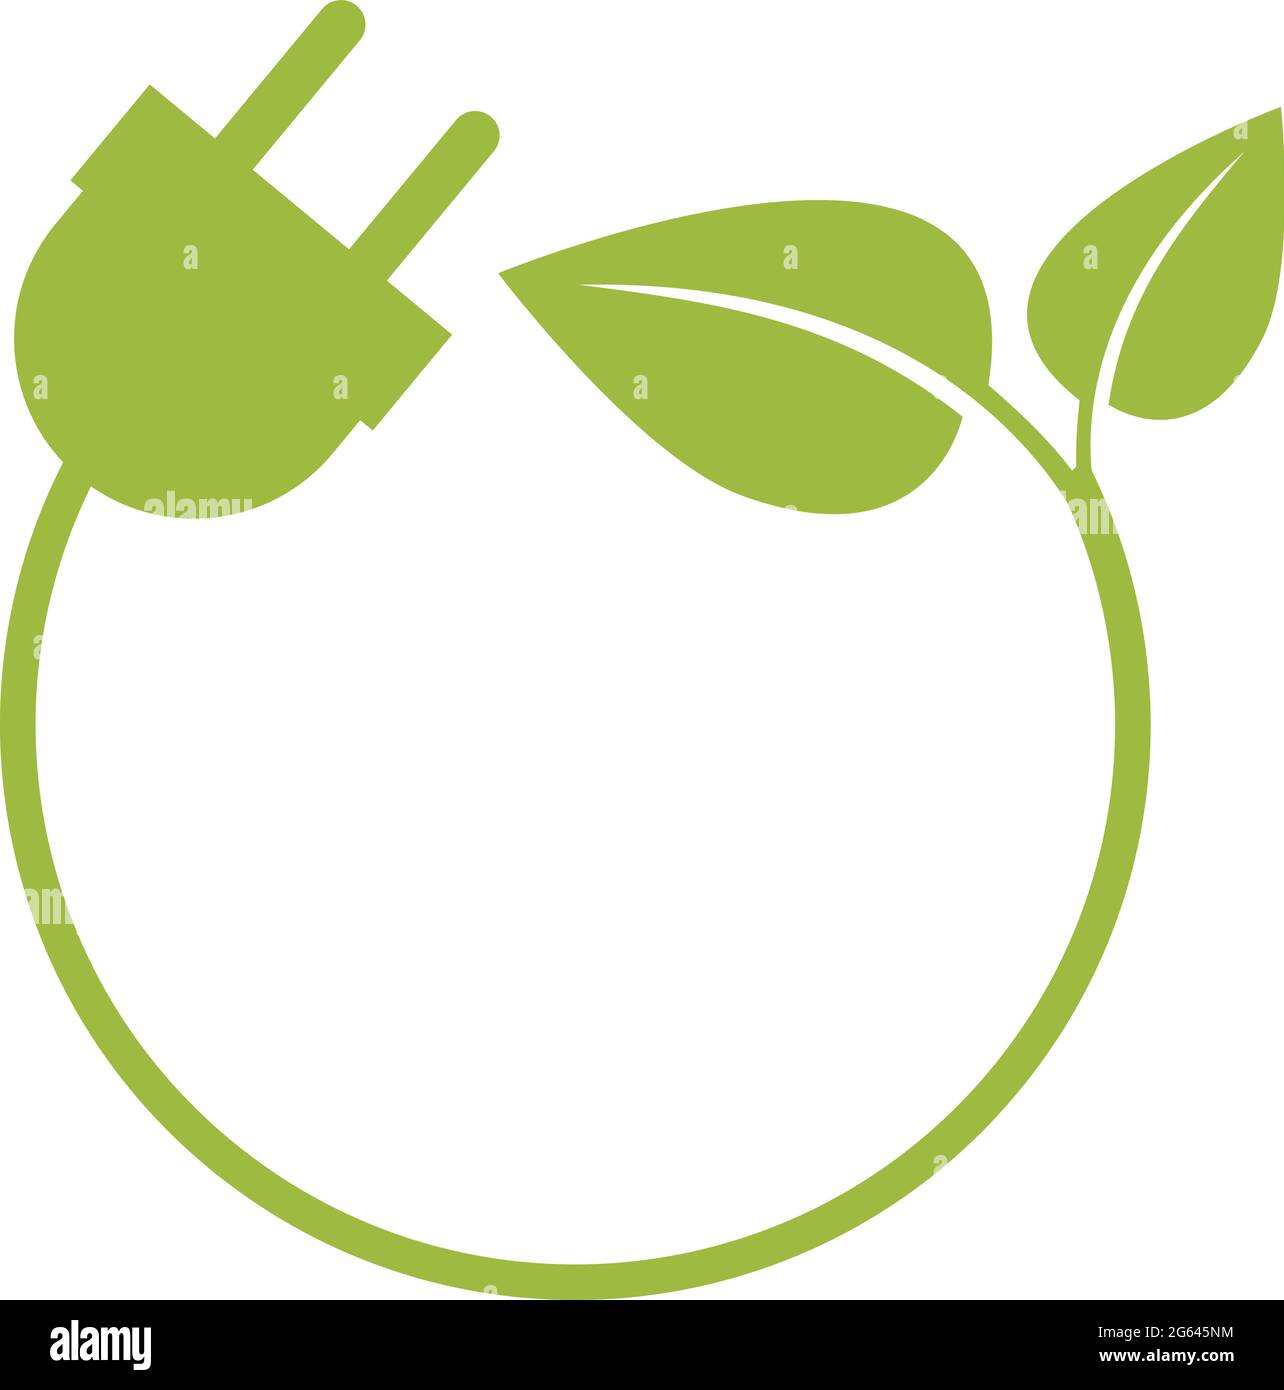 round green energy symbol or logo with plug and leaves, vector illustration Stock Vector